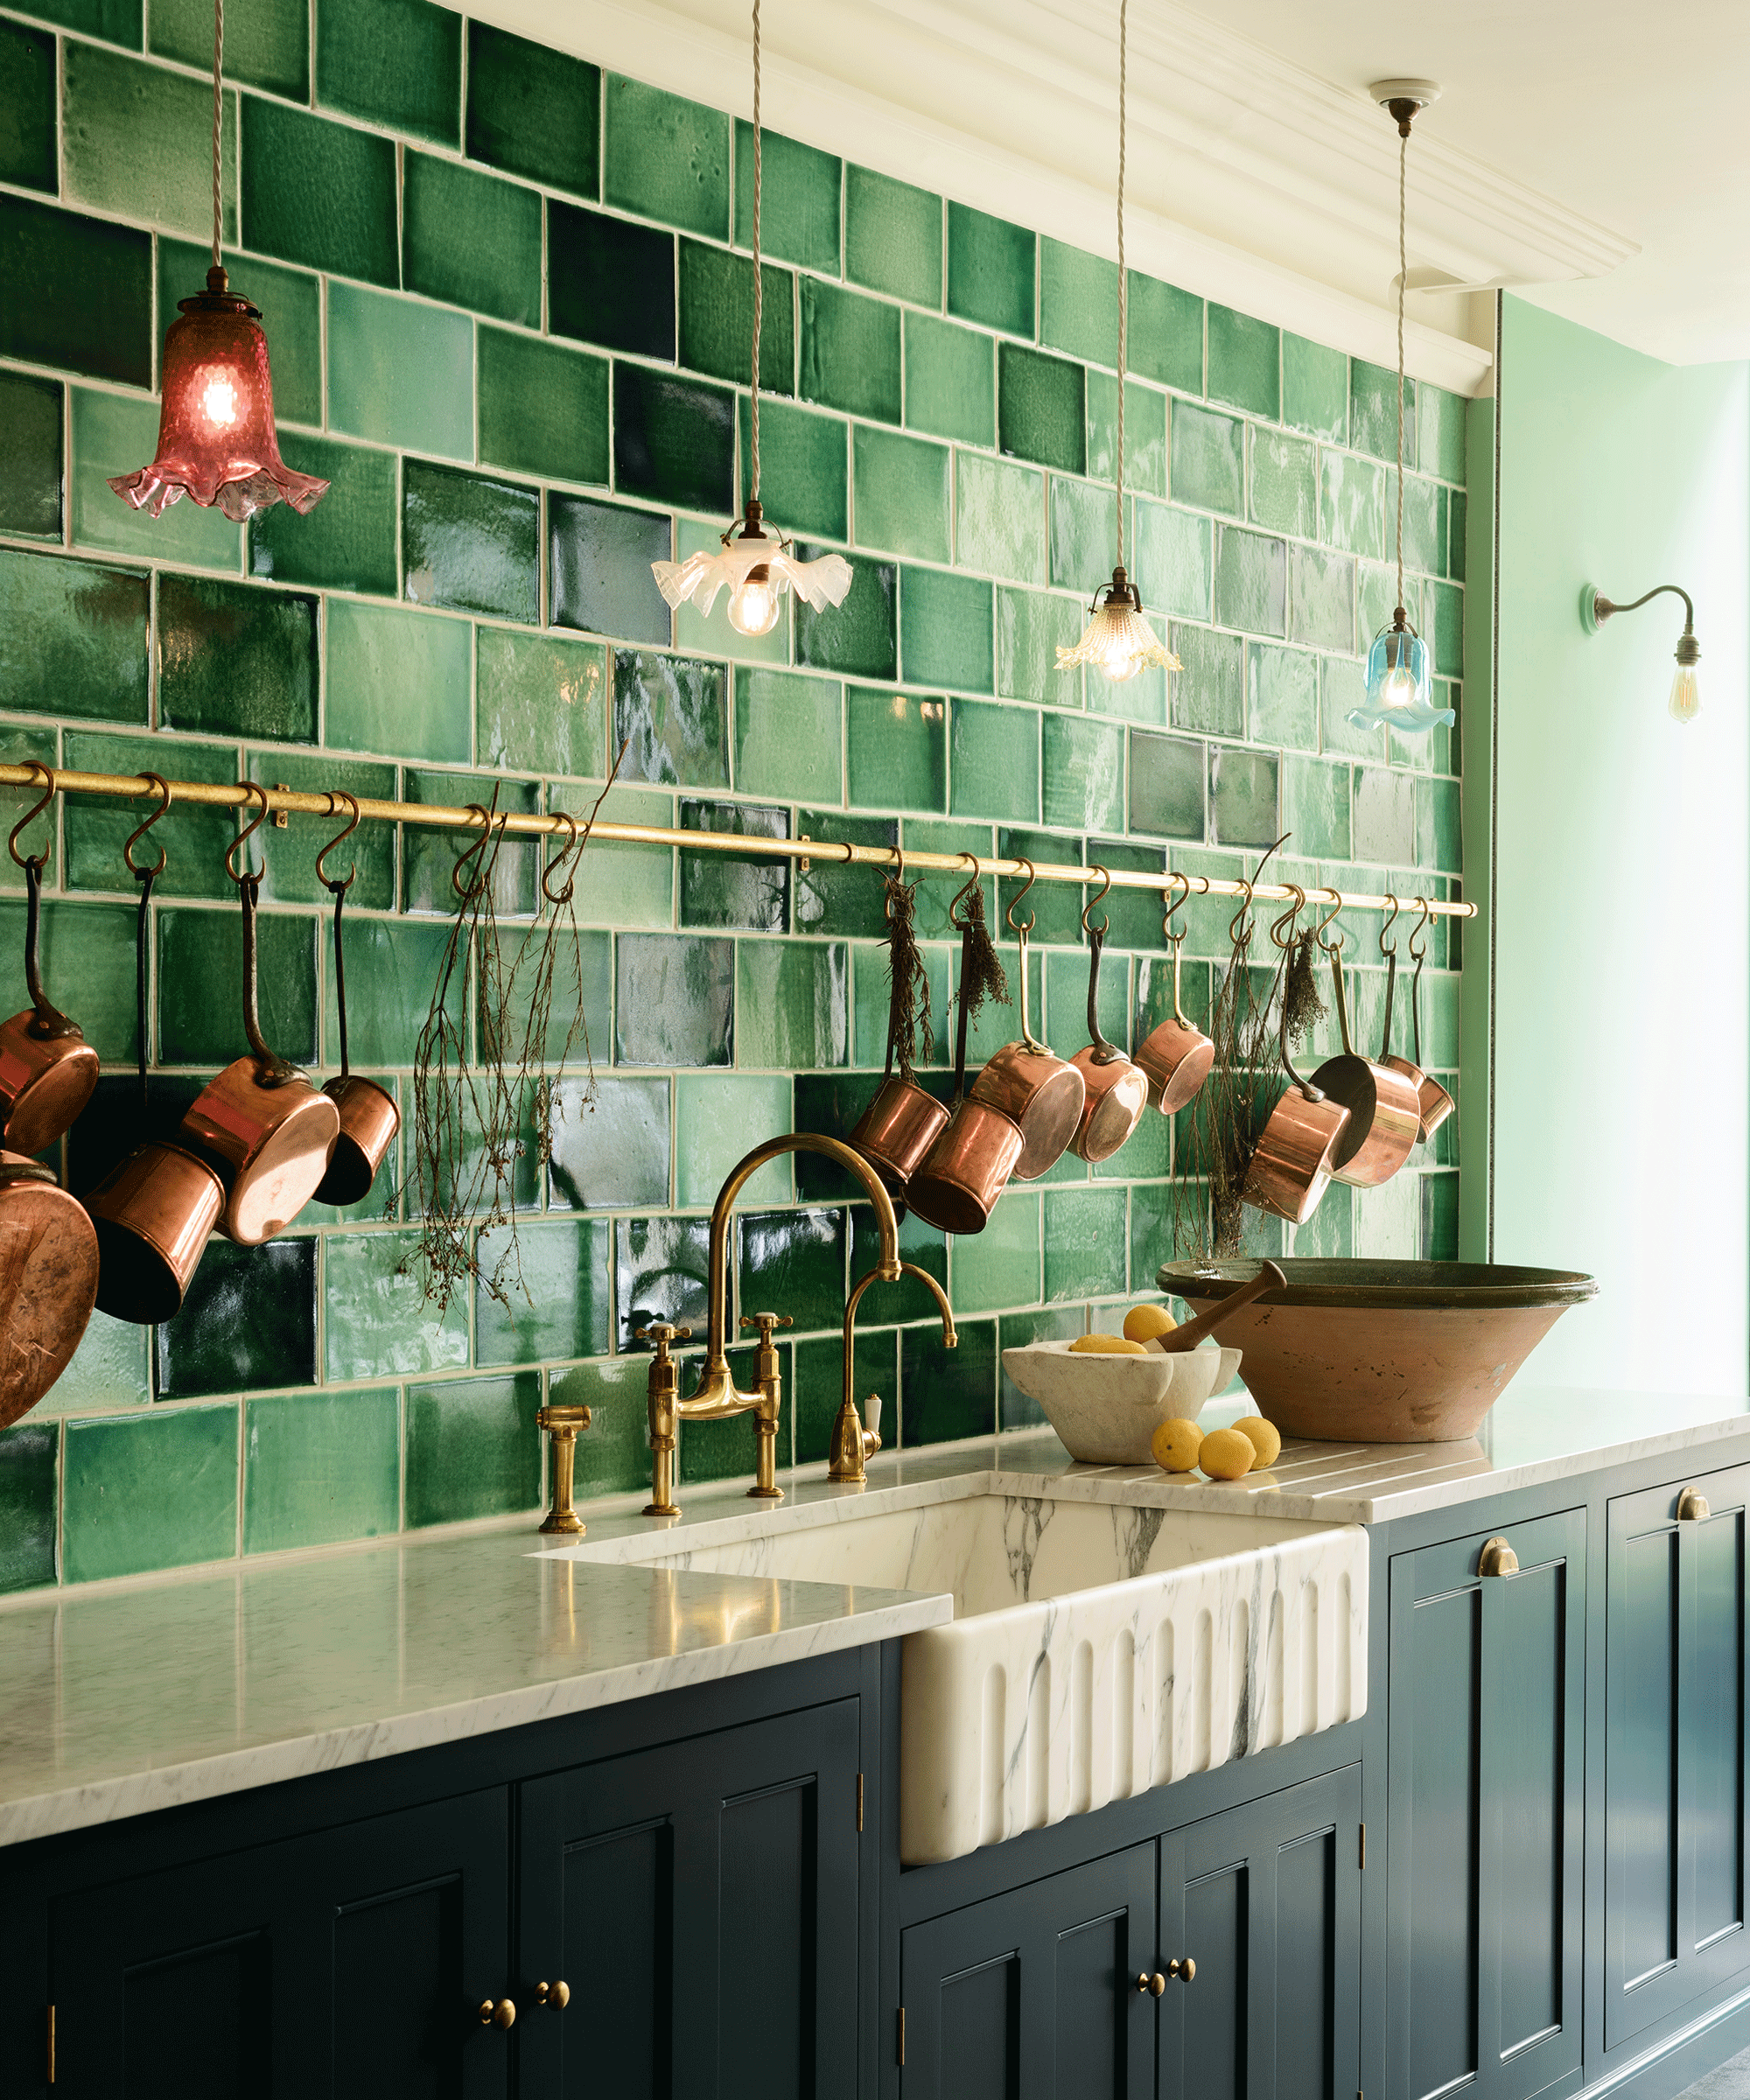 green kitchen with green tiles and pretty pendants hanging over the worktop